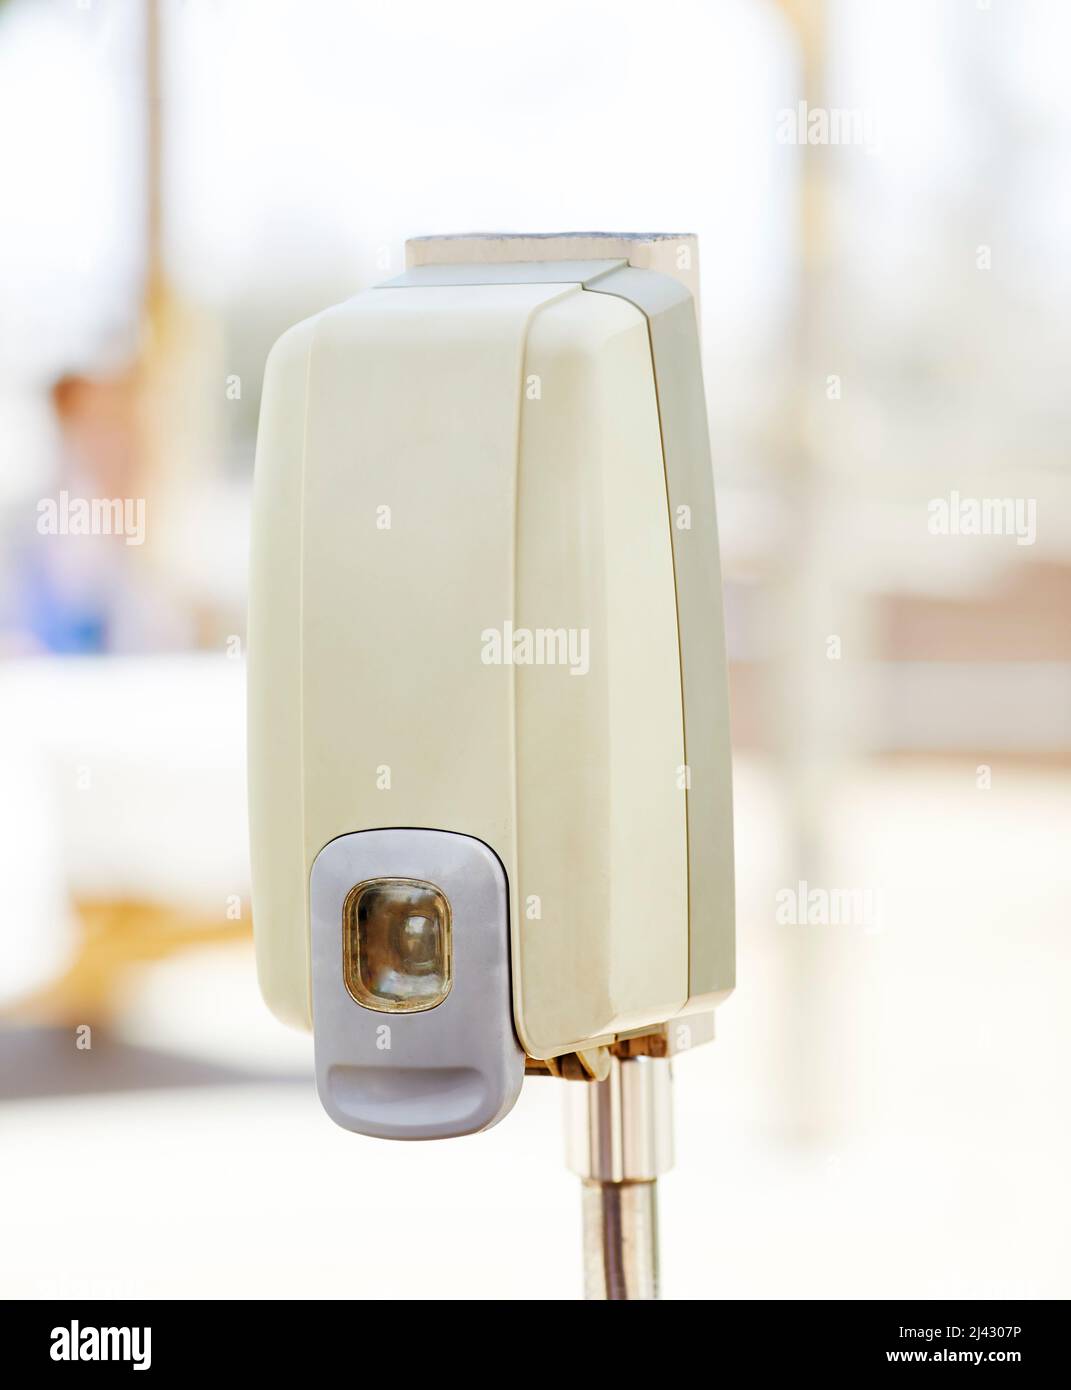 Hand Sanitizer dispenser installed outdoors with shallow depth of field Stock Photo